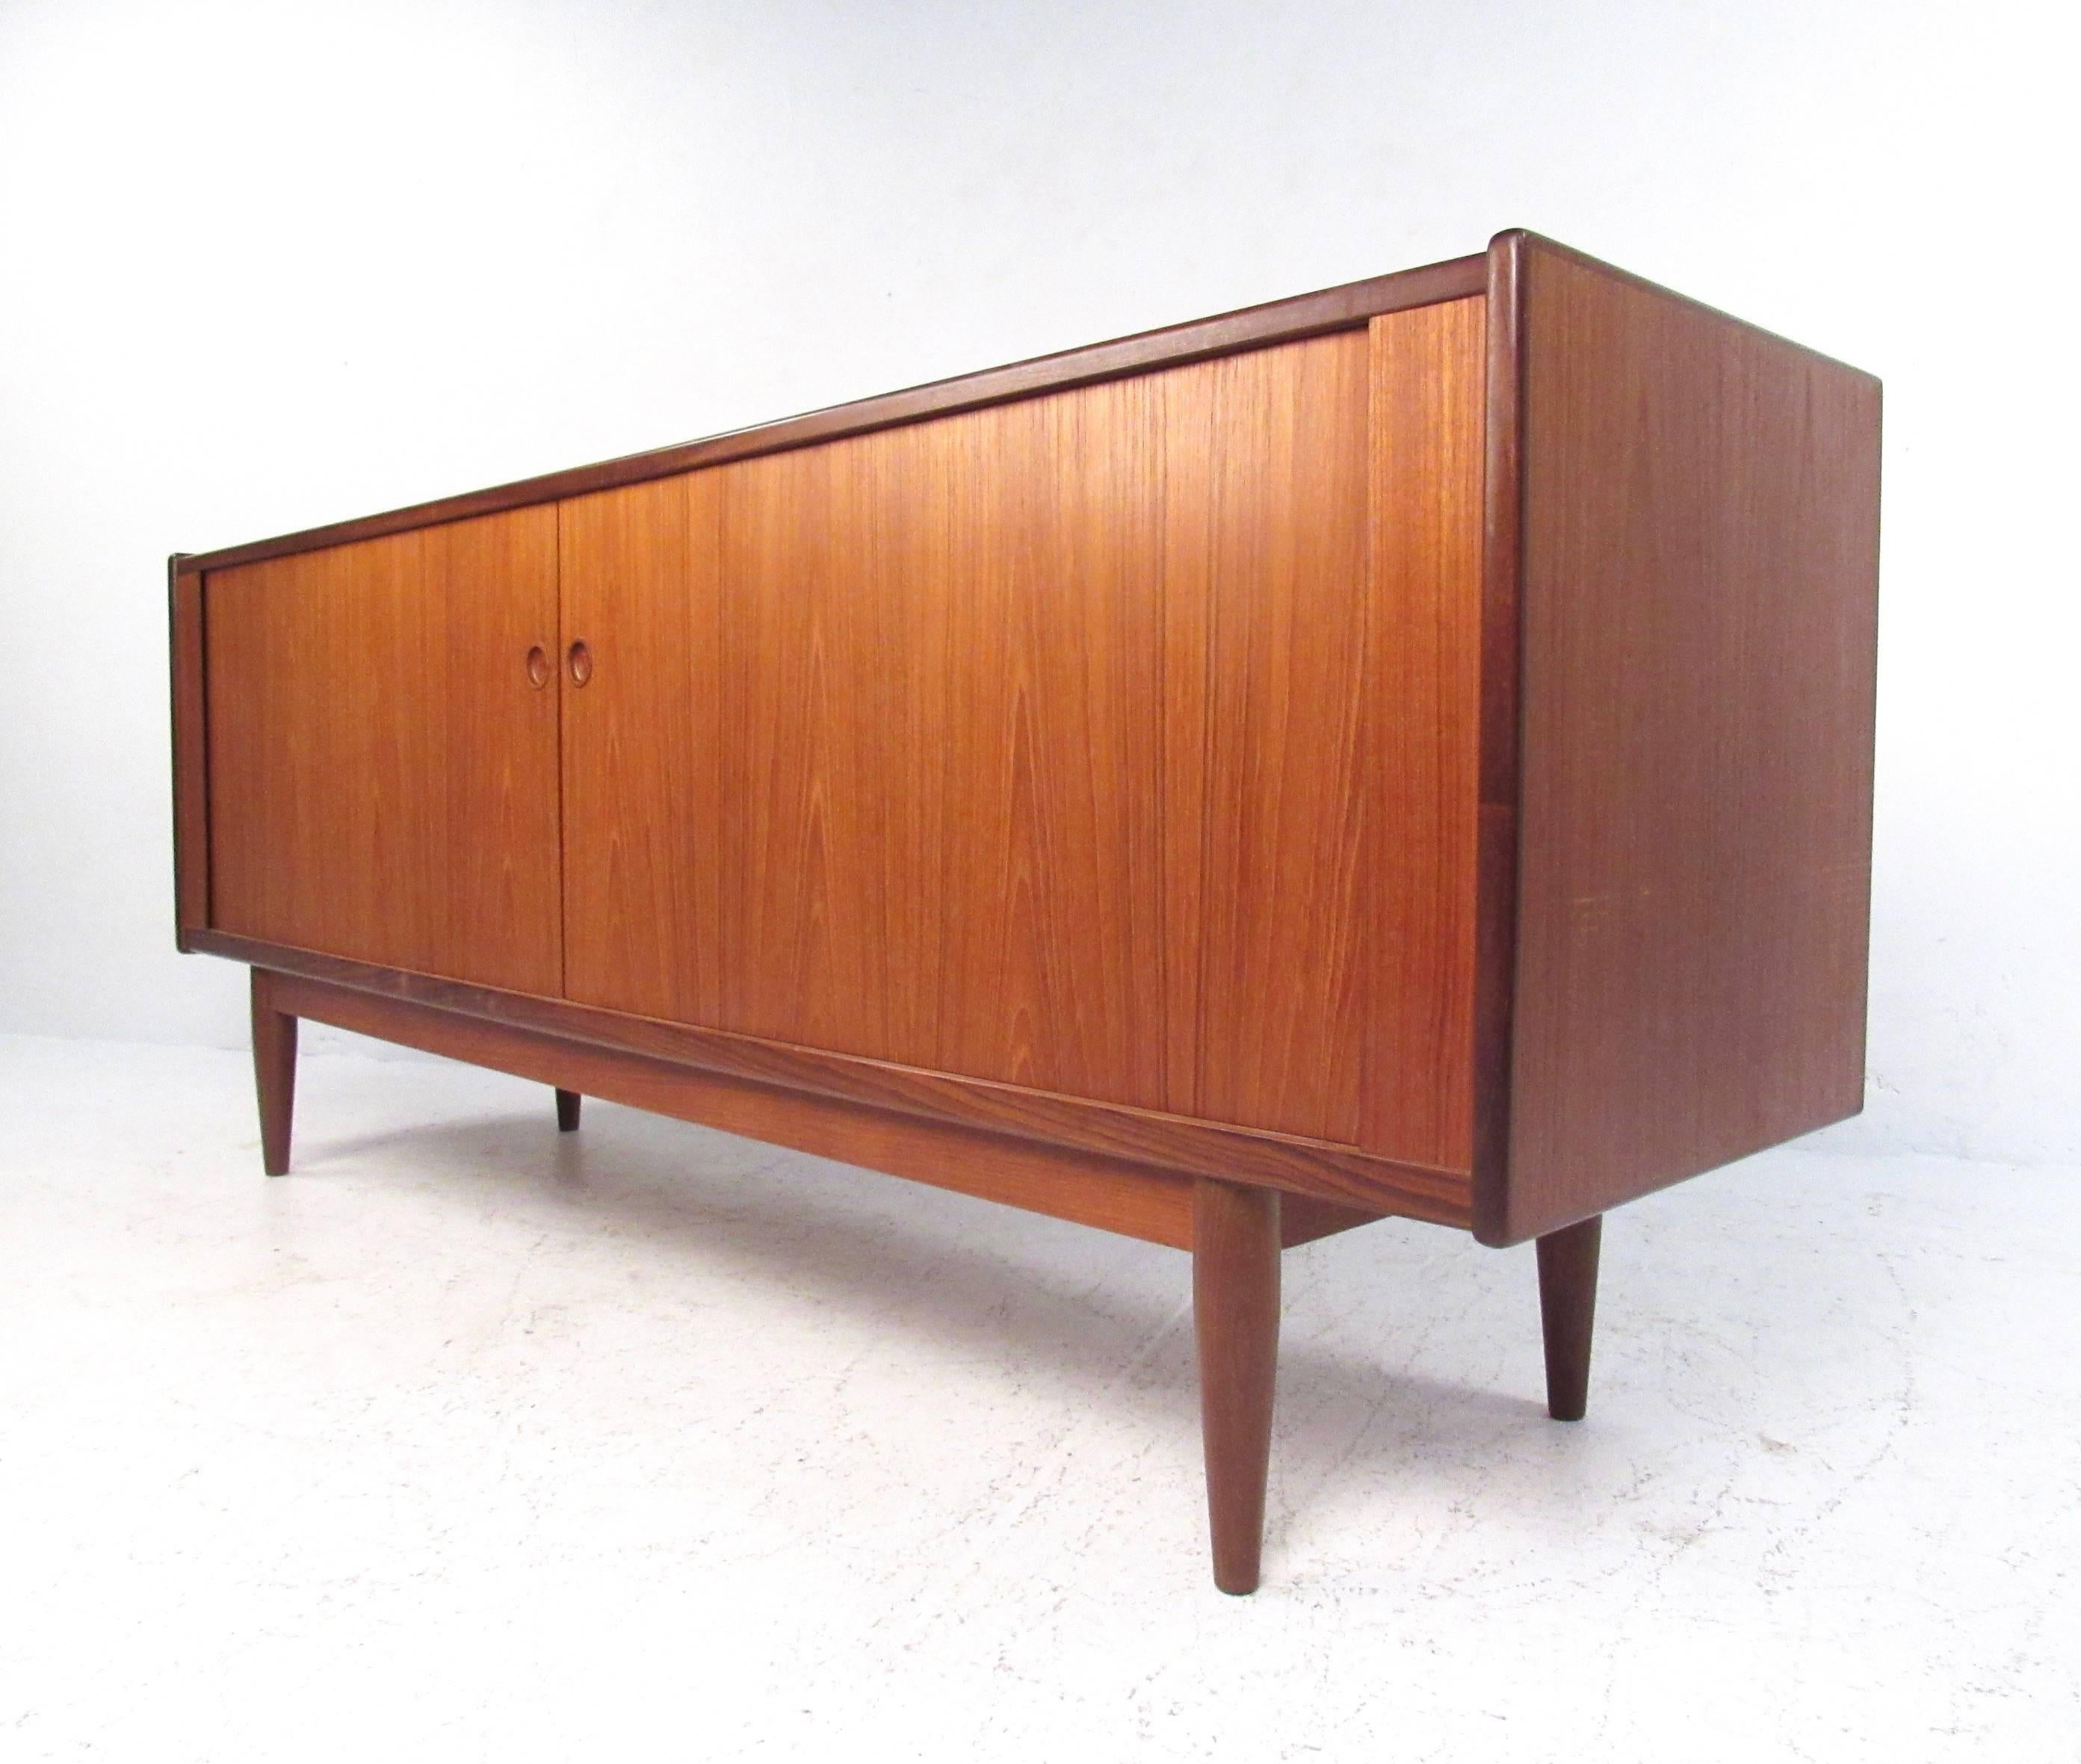 This vintage teak sideboard features a tambour design similar to that of Hans Wegner's 